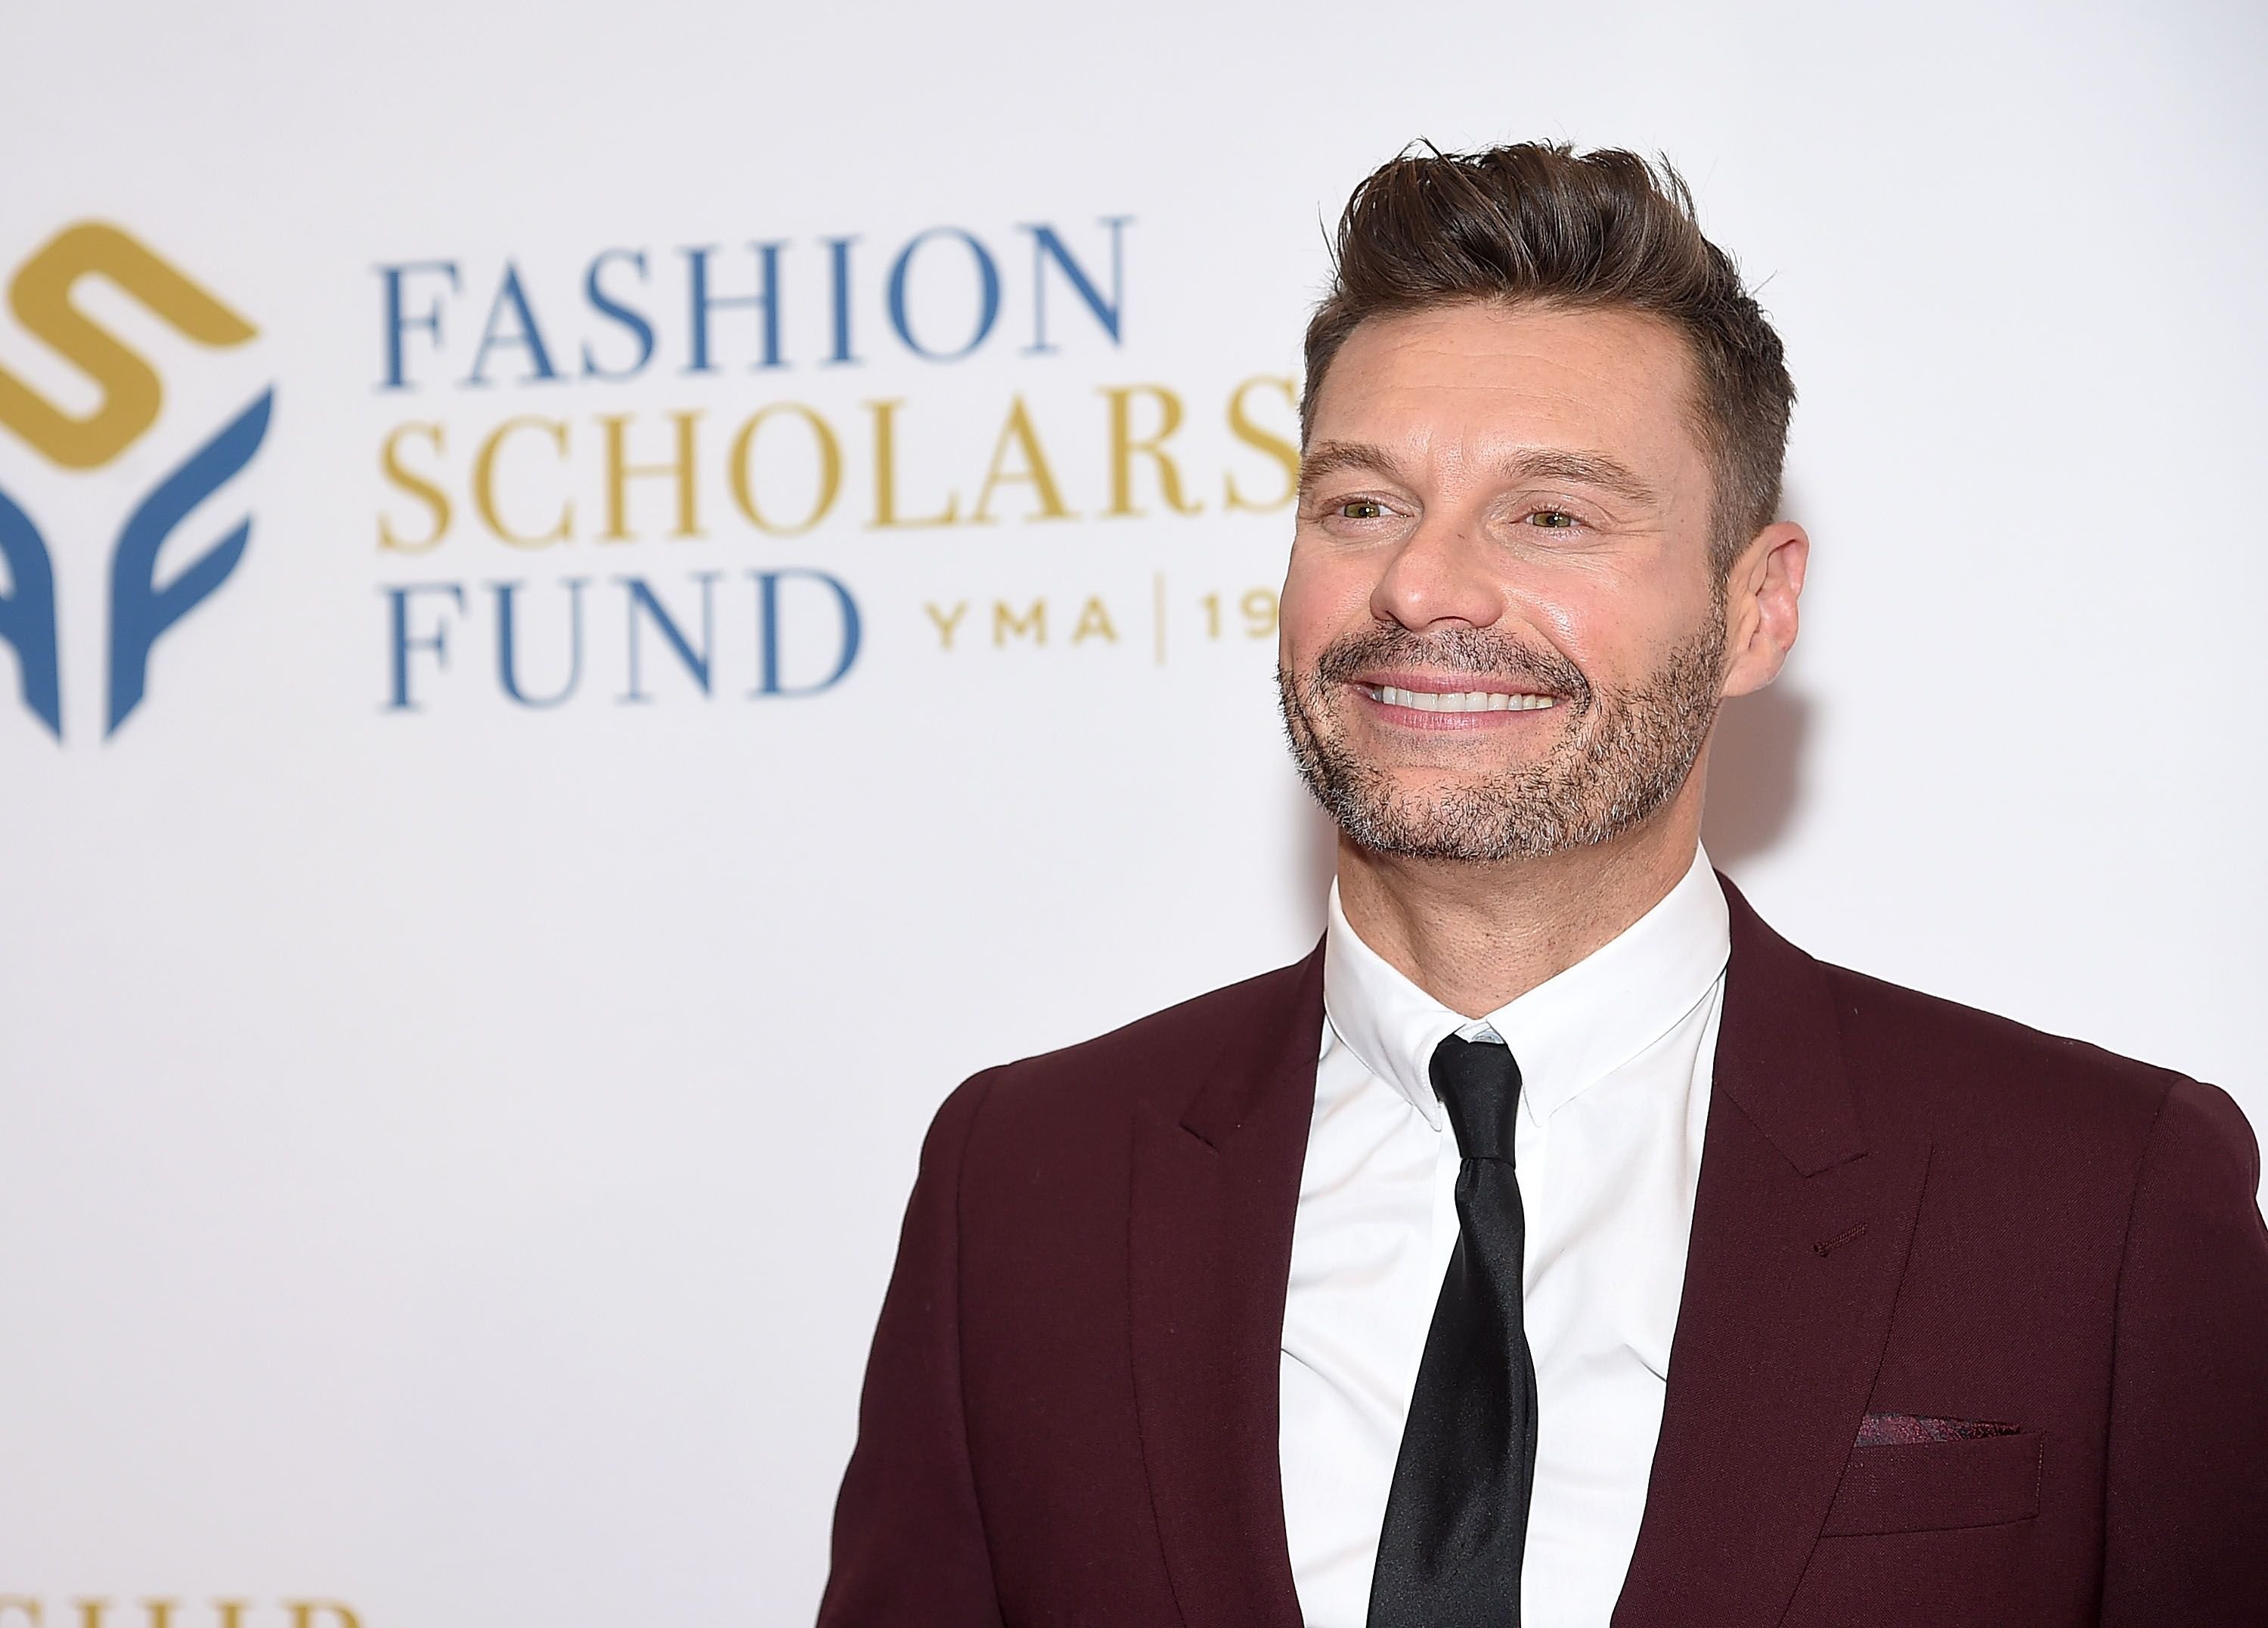 Ryan Seacrest at the 2019 Fashion Scholarship Fund Awards Gala on January 10 in New York. | Source: Getty Images